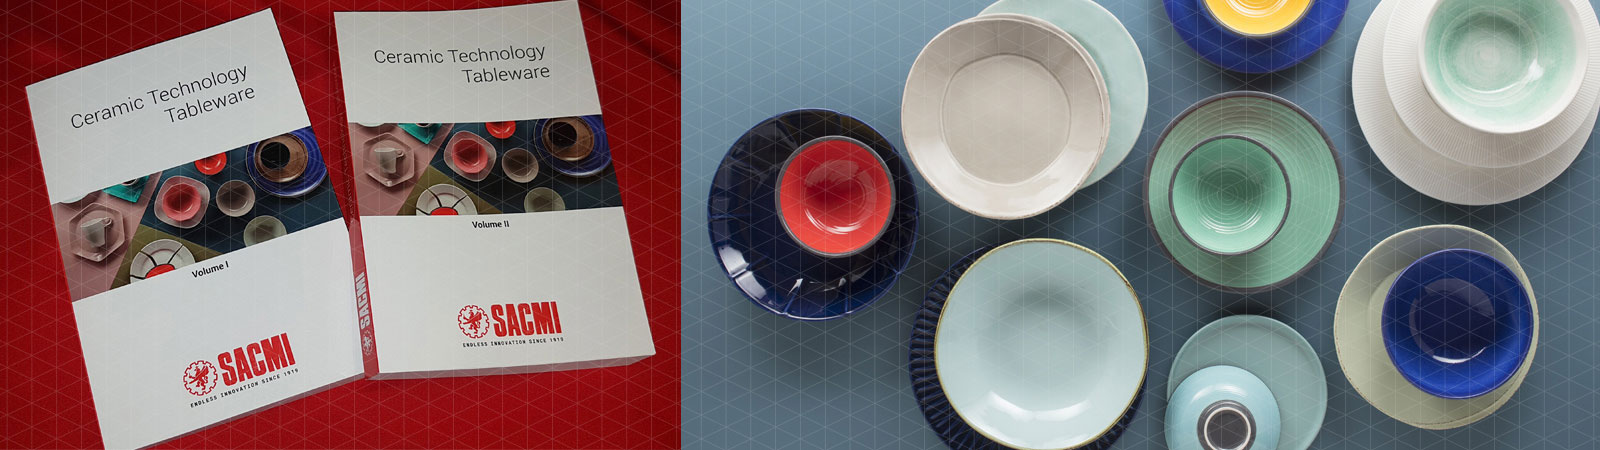 SACMI publishes first “technological manual” for the Tableware industry